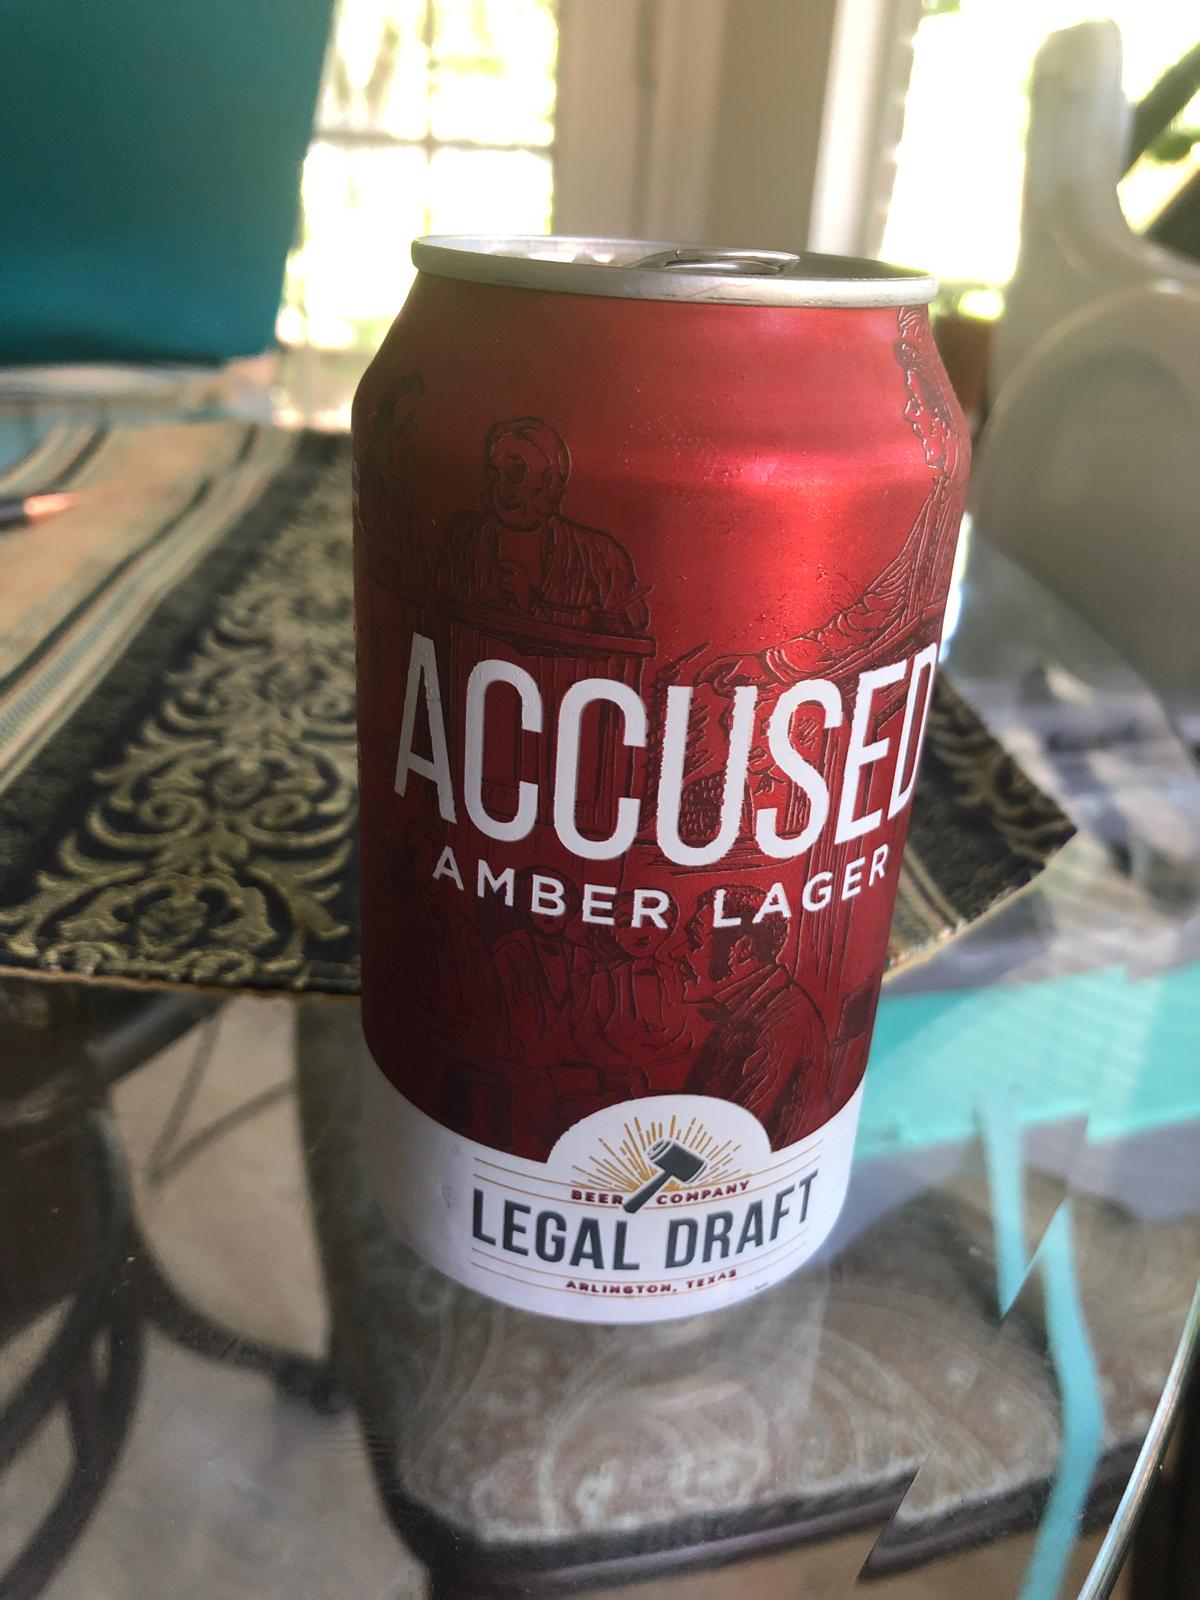 Accused Amber Lager